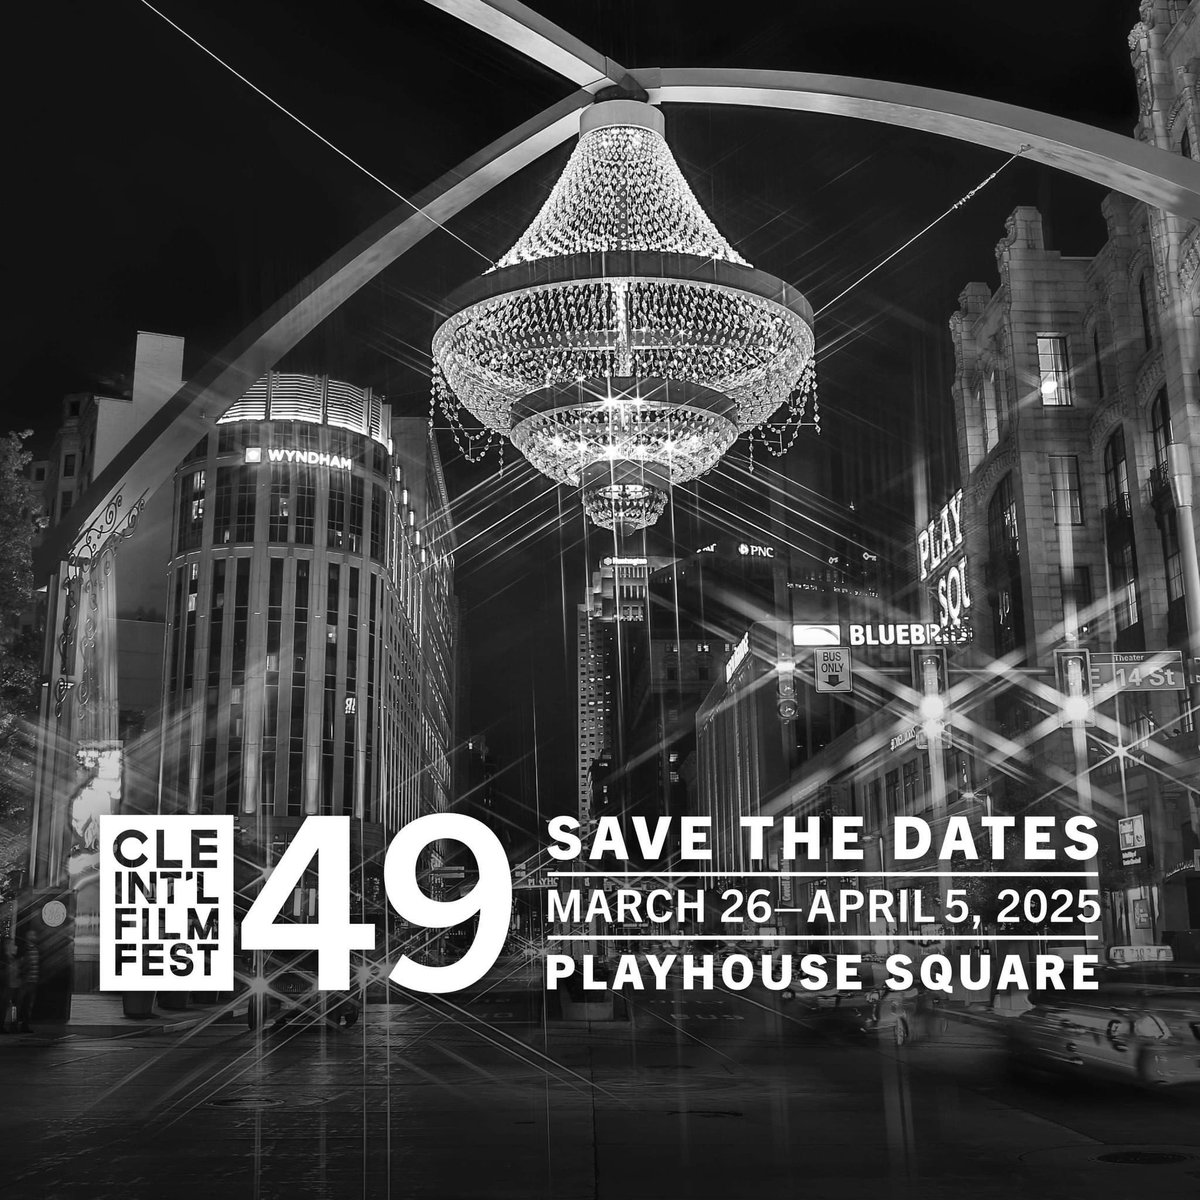 Mark your calendars for #CIFF49 March 26 - April 5, 2025 at @playhousesquare